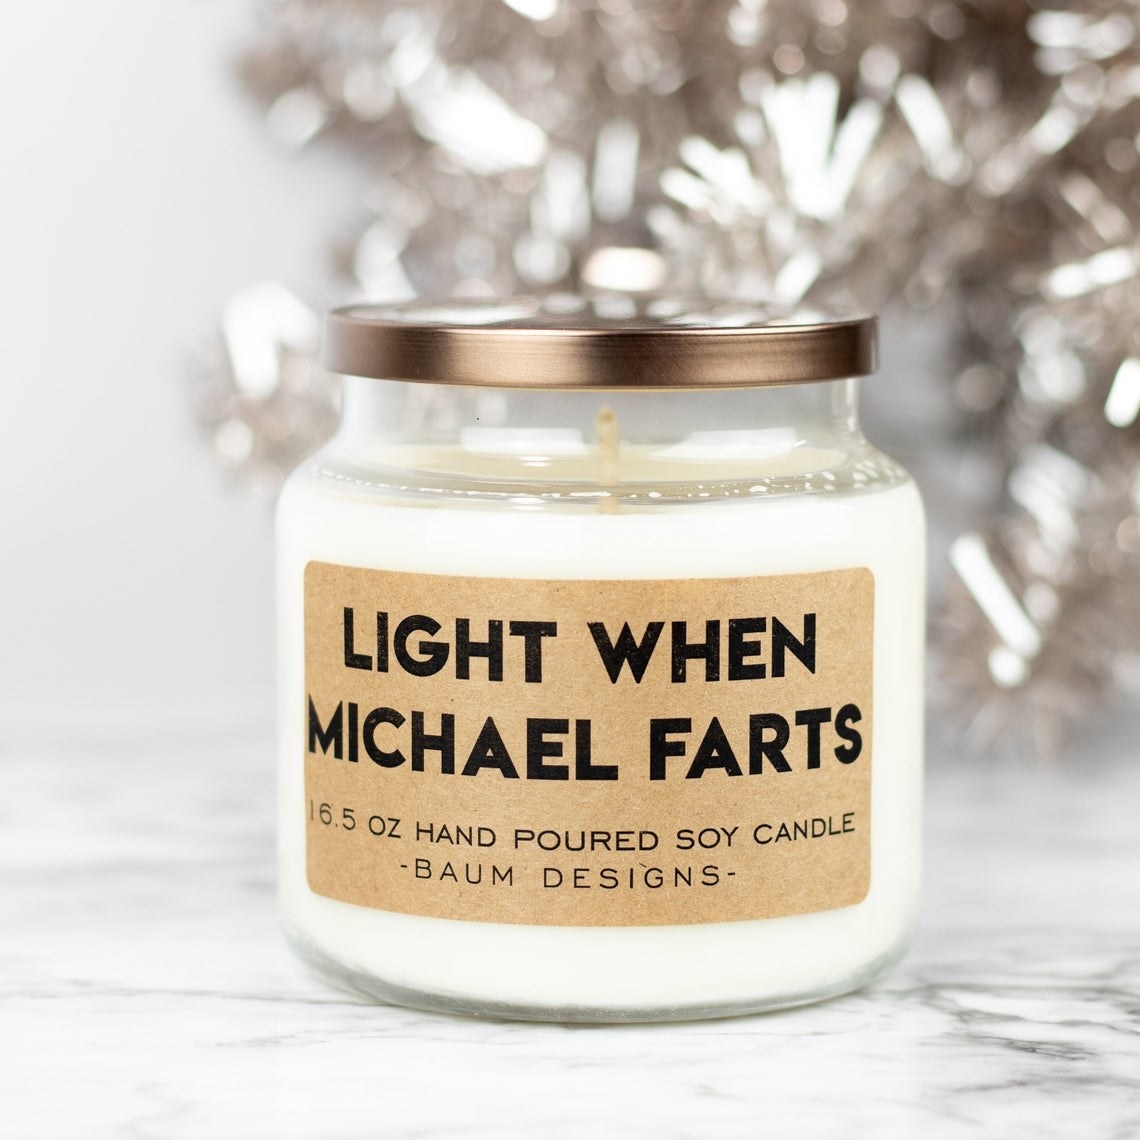 glass candle that says light when michael farts